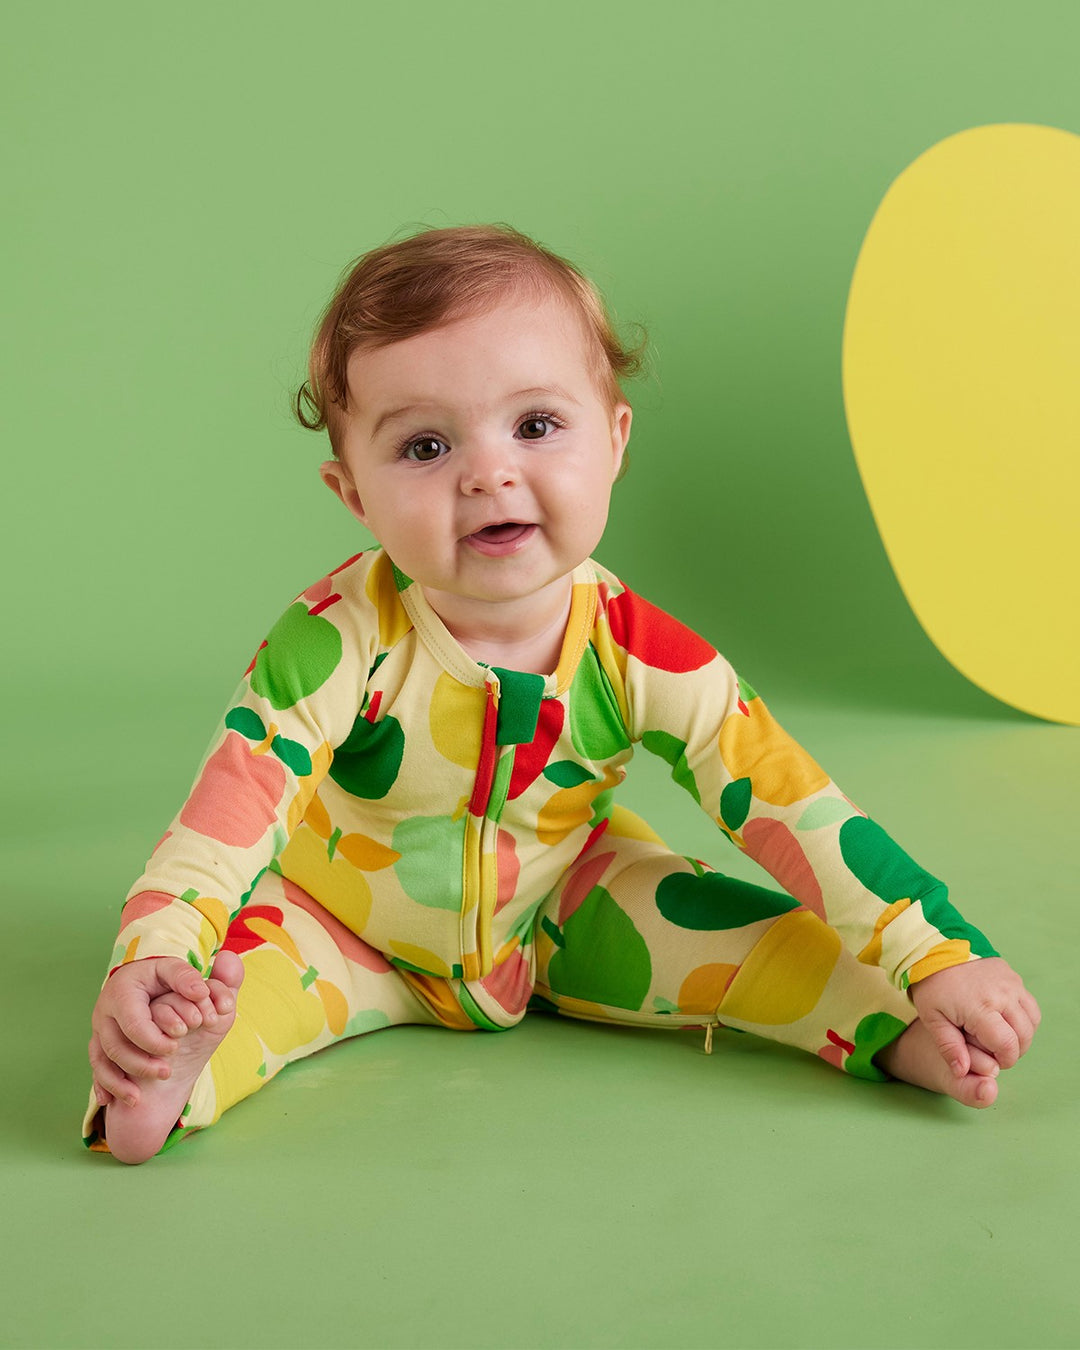 Halcyon Nights Long Sleeve Romper - A Is For Apple Baby